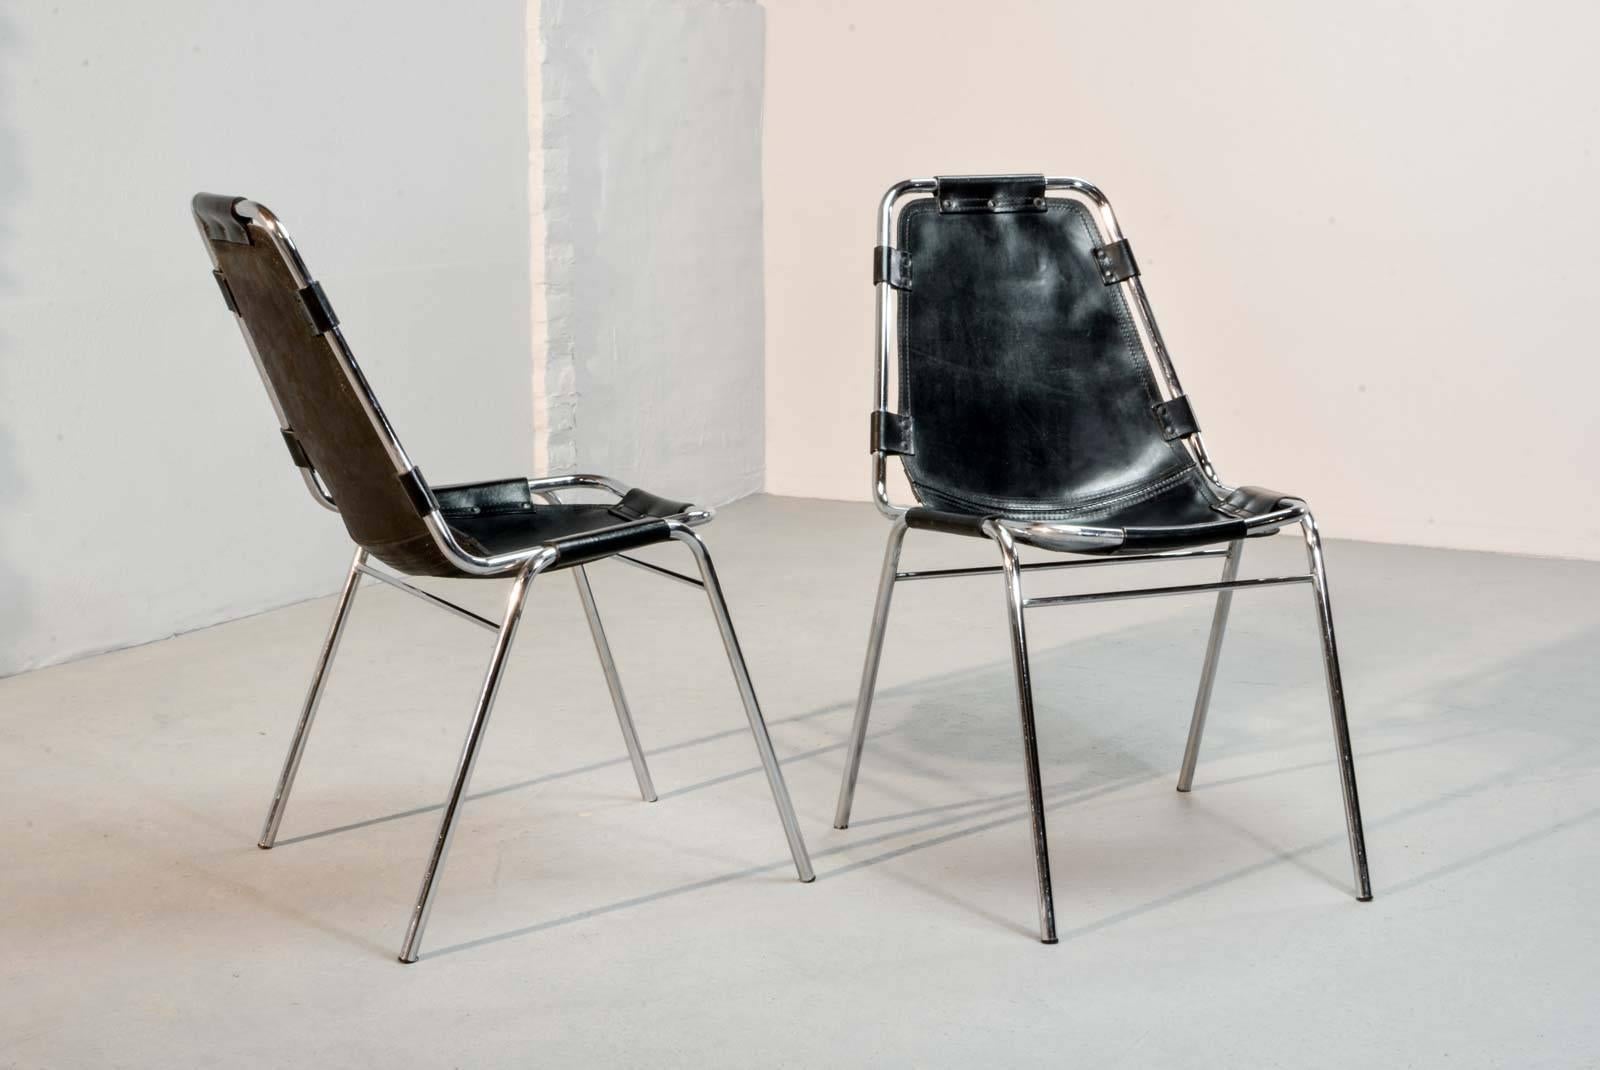 A pair of authentic Les Arcs chairs, designed by the French furniture maker Charlotte Perriand for Ski resort Les Arcs, France, 1968. Exclusively manufactured by the renowned Italian furniture maker Cassina. This rare black early edition shows a